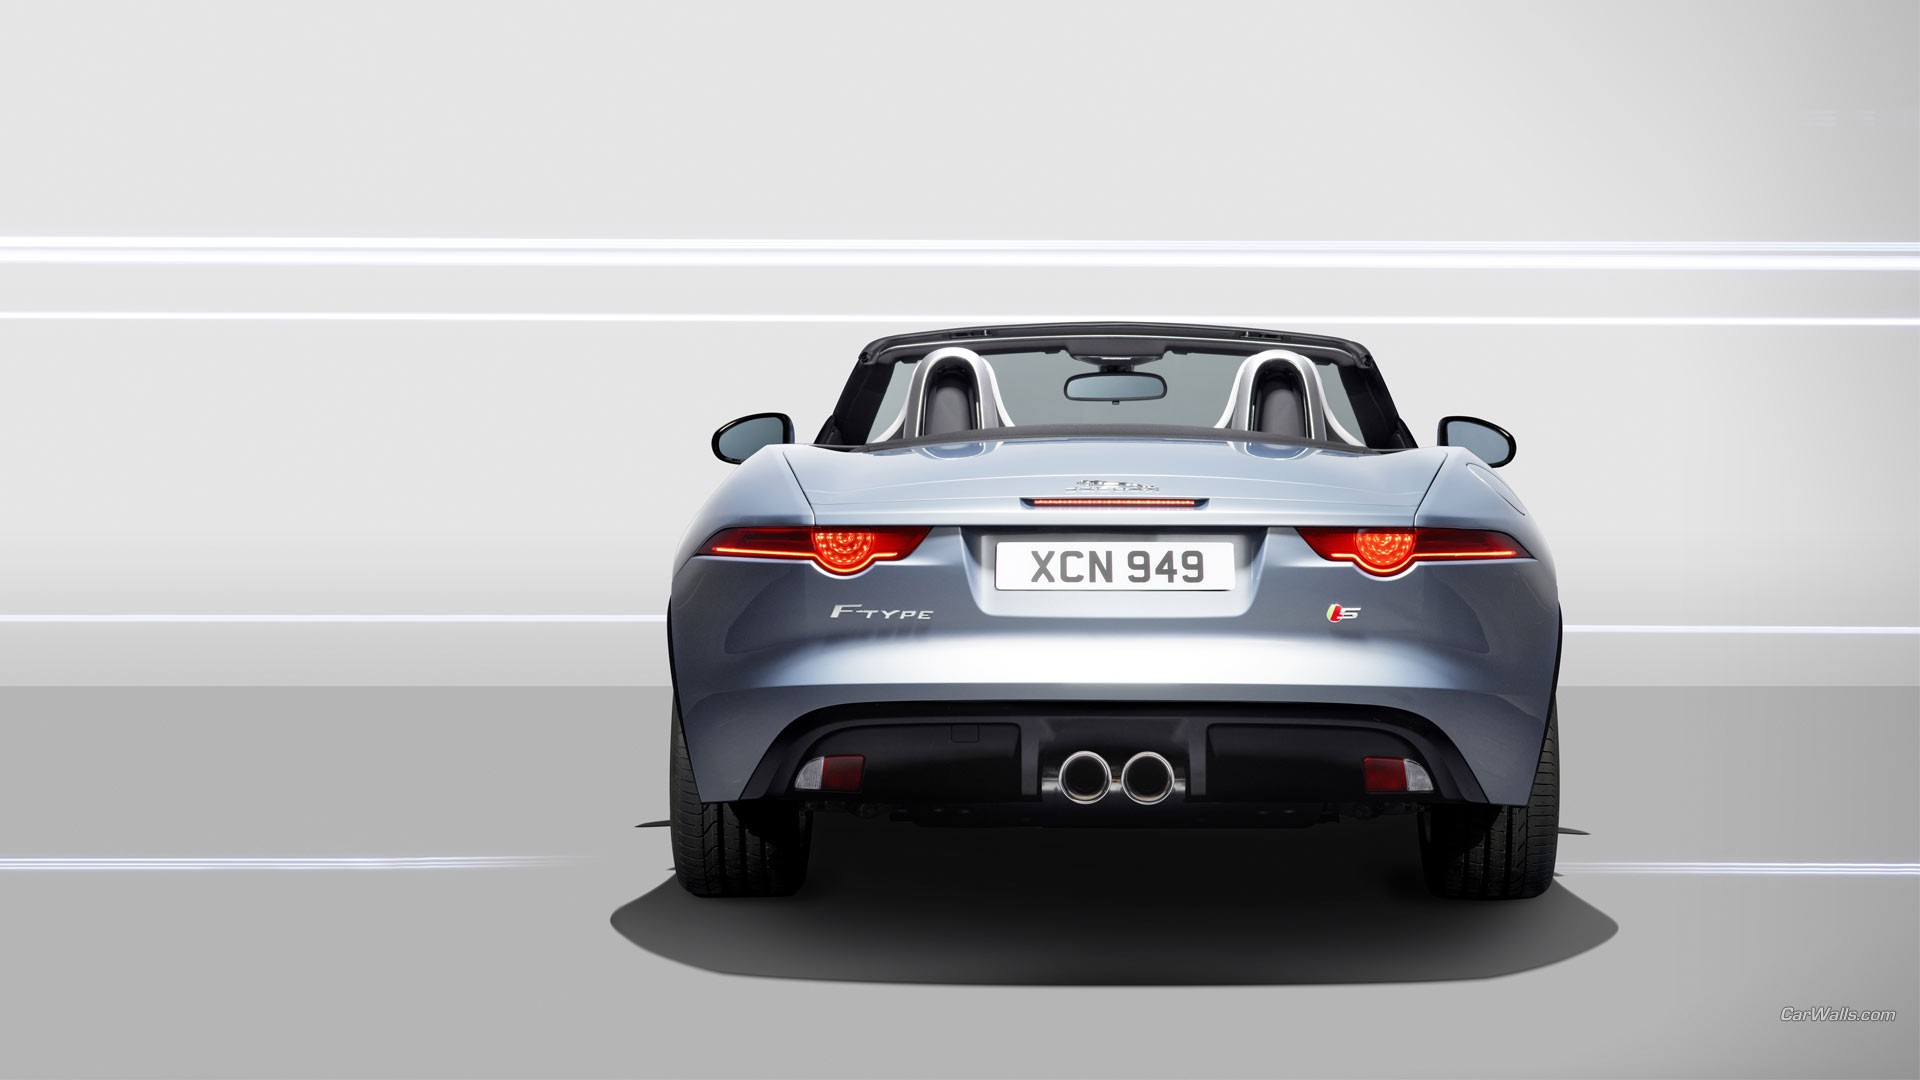 General 1920x1080 Jaguar F-Type car vehicle silver cars Jaguar (car) numbers British cars convertible Grand Tour rear view taillights licence plates